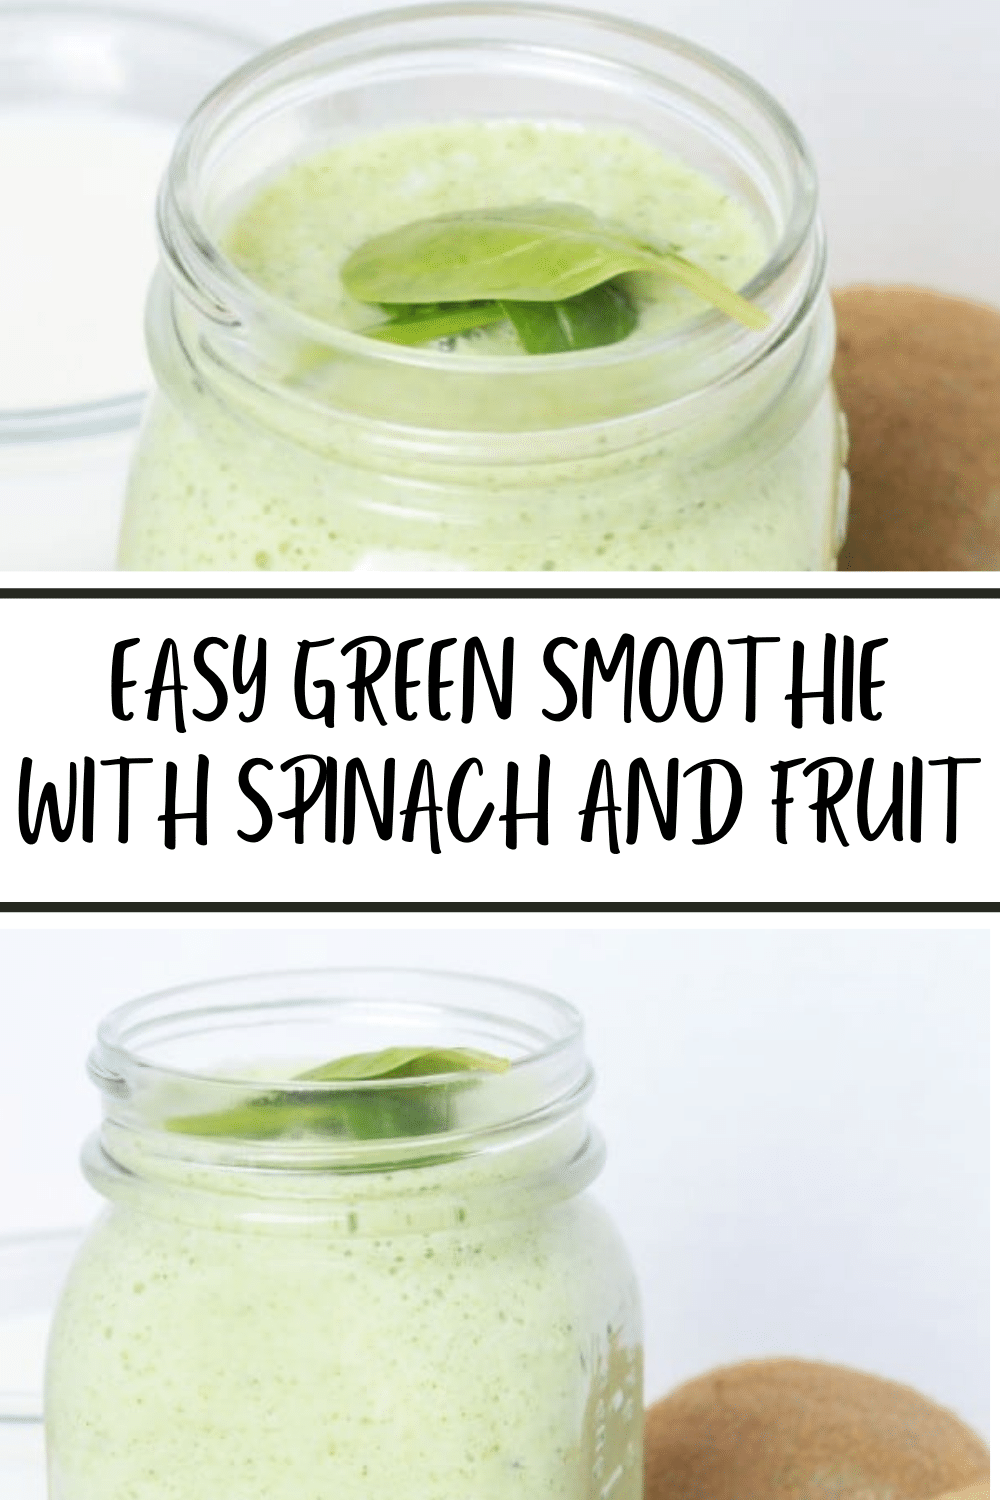 This is an awesome recipe for an easy green smoothie that makes eating healthy a joy and not a burden. #smoothie #healthyeating #easybreakfast via @wondermomwannab